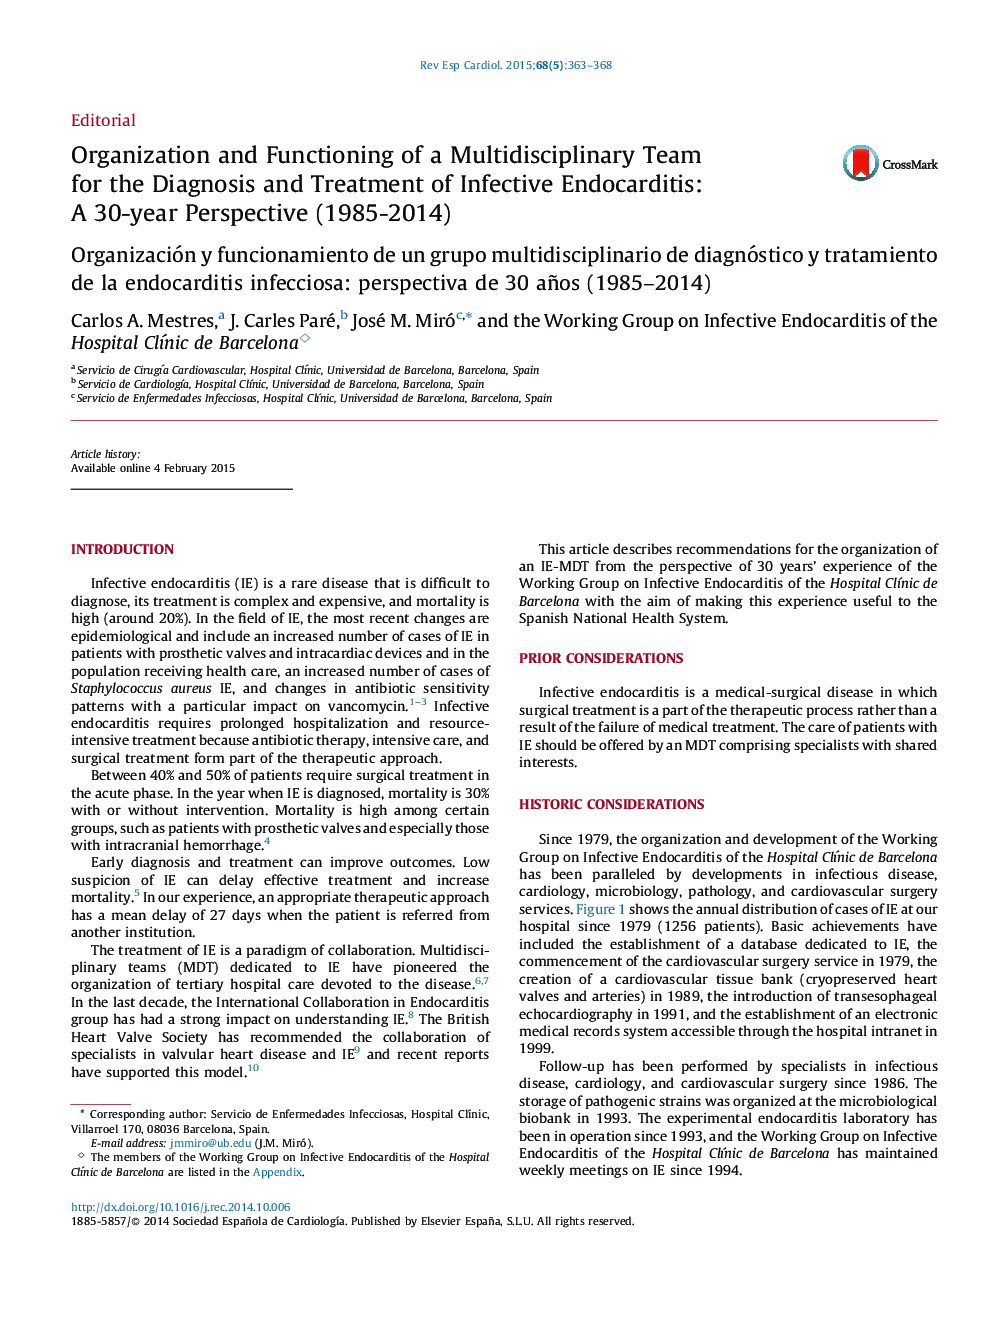 Organization and Functioning of a Multidisciplinary Team for the Diagnosis and Treatment of Infective Endocarditis: A 30-year Perspective (1985-2014)